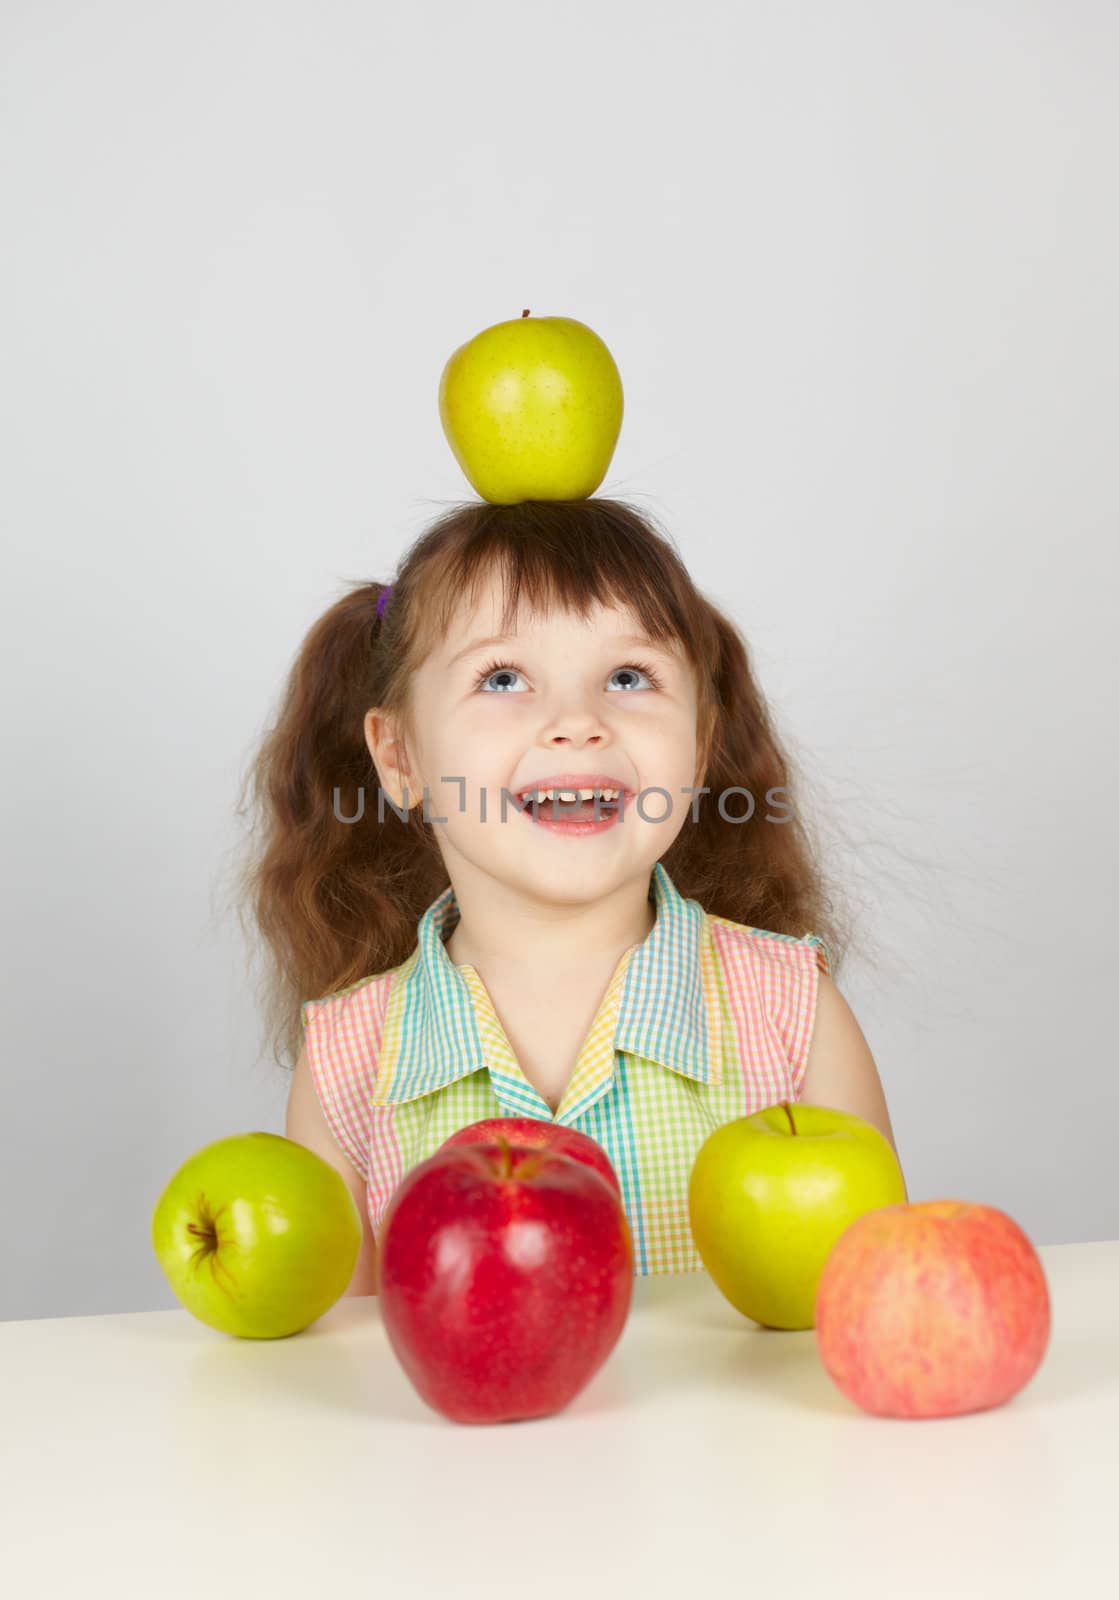 Apple on head of a cheerful girl by pzaxe